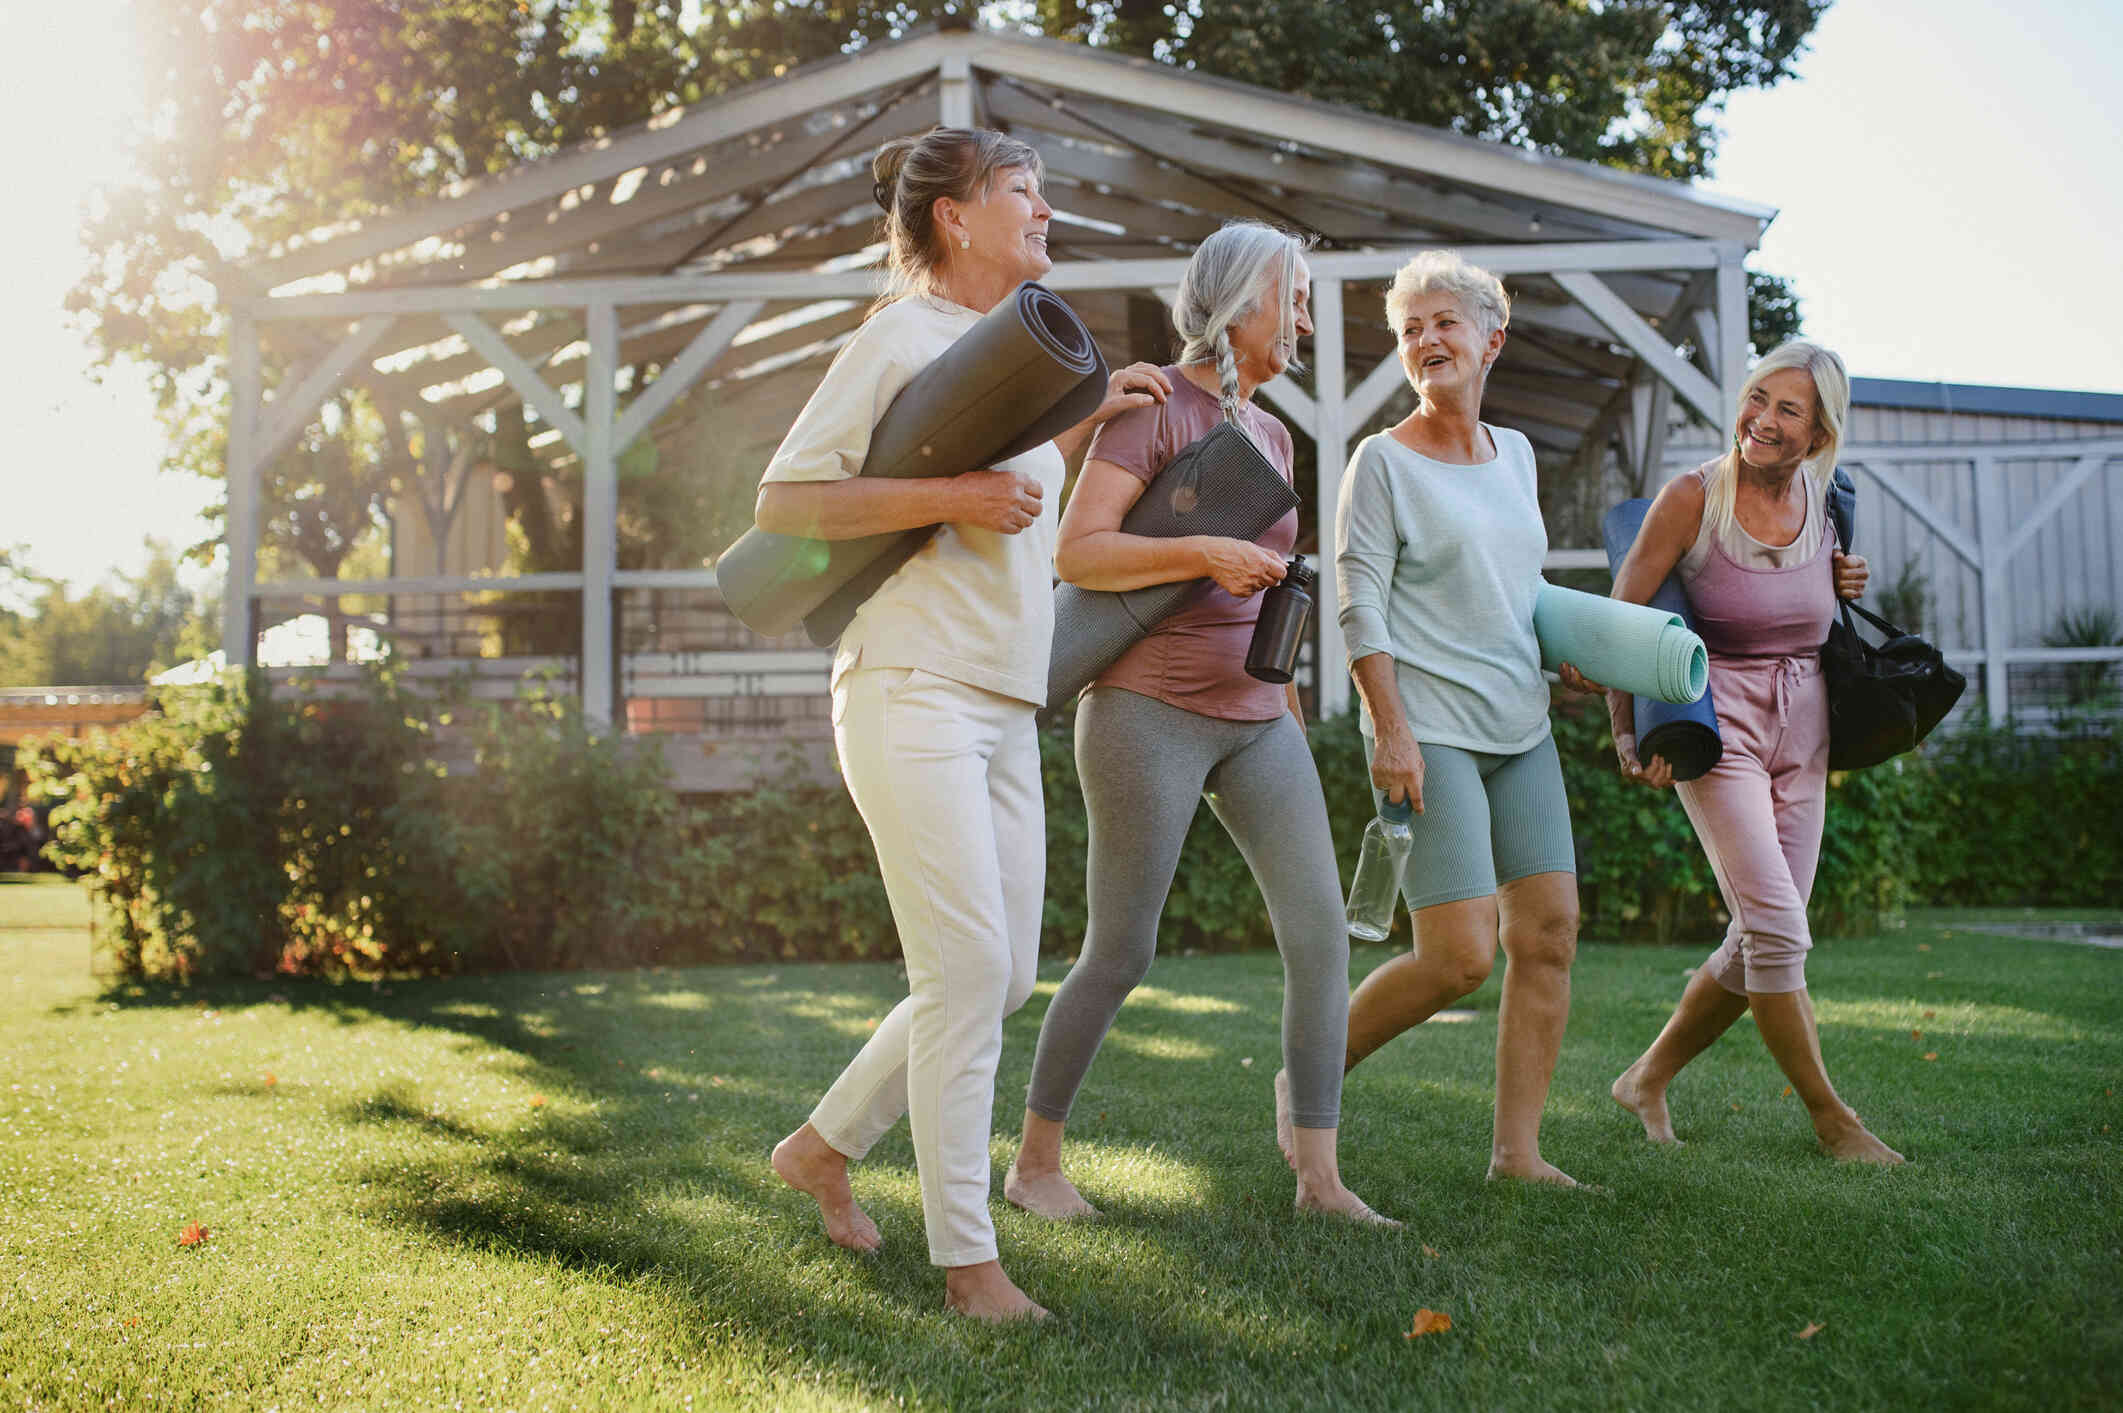 A group of adult woman walk along the grass together while holding yoga mats and chatting.